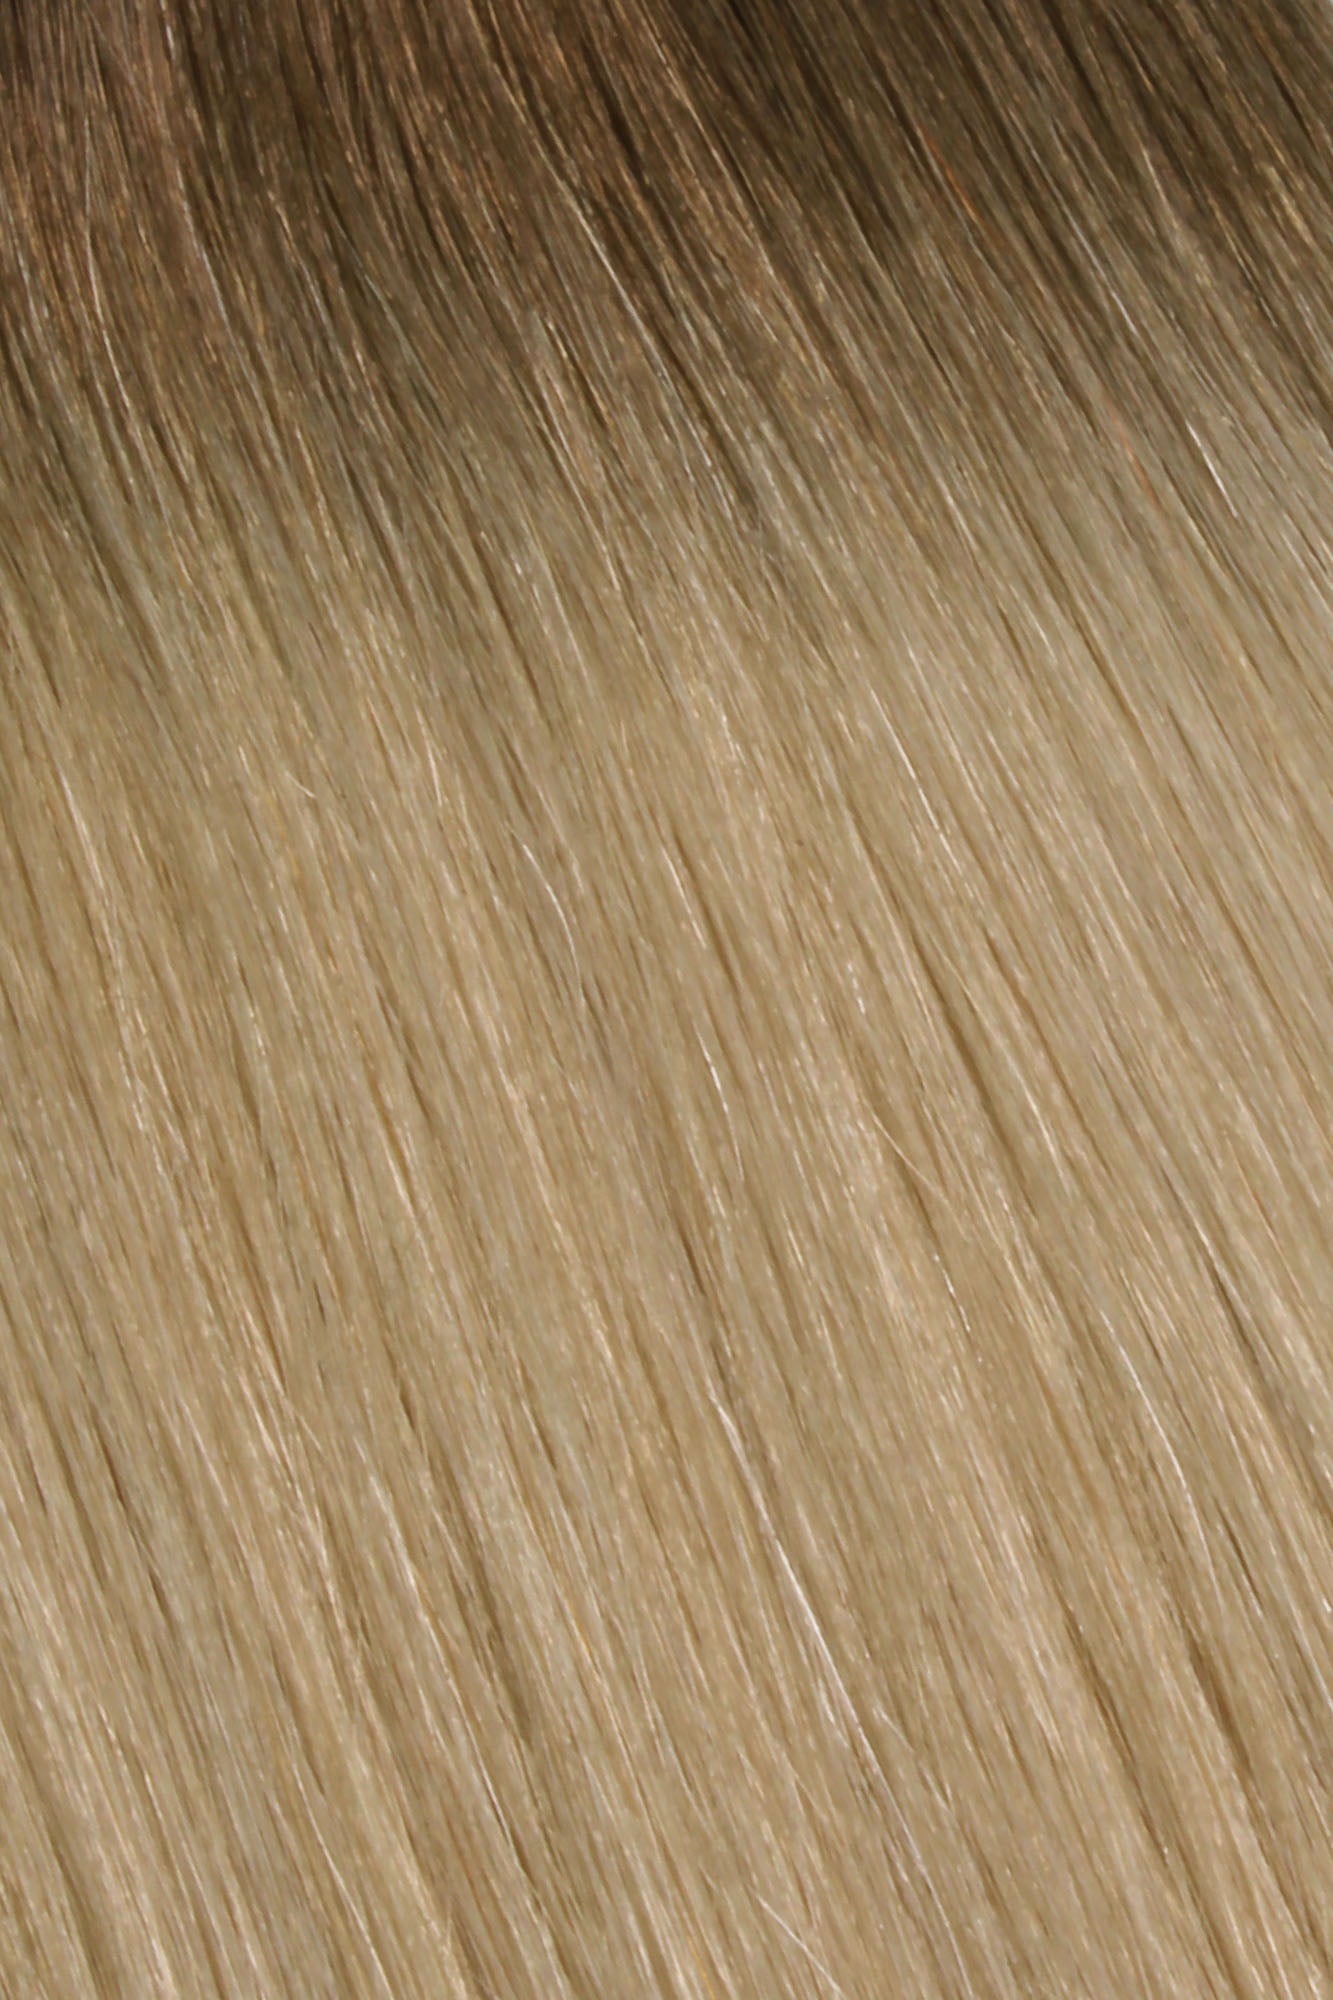 Nano Bonds 22 Inches - SWAY Hair Extensions Rooted-Beach-Ash-Blonde-R5-9-613 Ultra-fine, invisible bonds for a flawless, natural look. 100% Remy Human hair, lightweight and versatile. Reusable and perfect for individual or salon use.